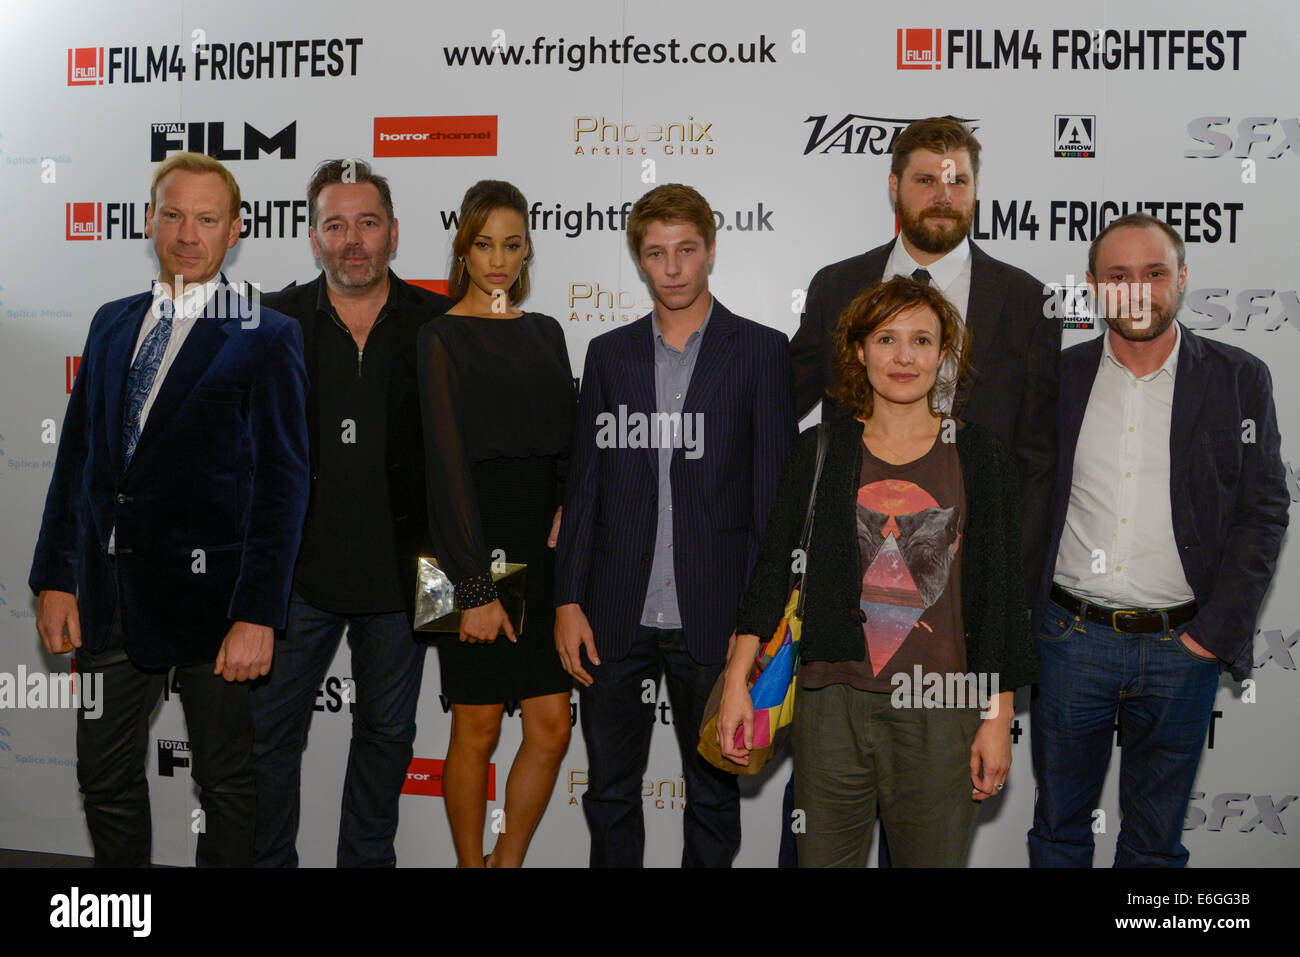 The 15th Film4 Frightfest on 22/08/2014 at The VUE West End, London. The 15th Film4 Frightfest. The World Premiere of The Forgotten. Persons pictured: Shaun Dingwall, James Doherty, Elarica Gallacher, Clem Tibber, Lyndsey Marshal, Oliver Frampton. Picture by Julie Edwards Stock Photo